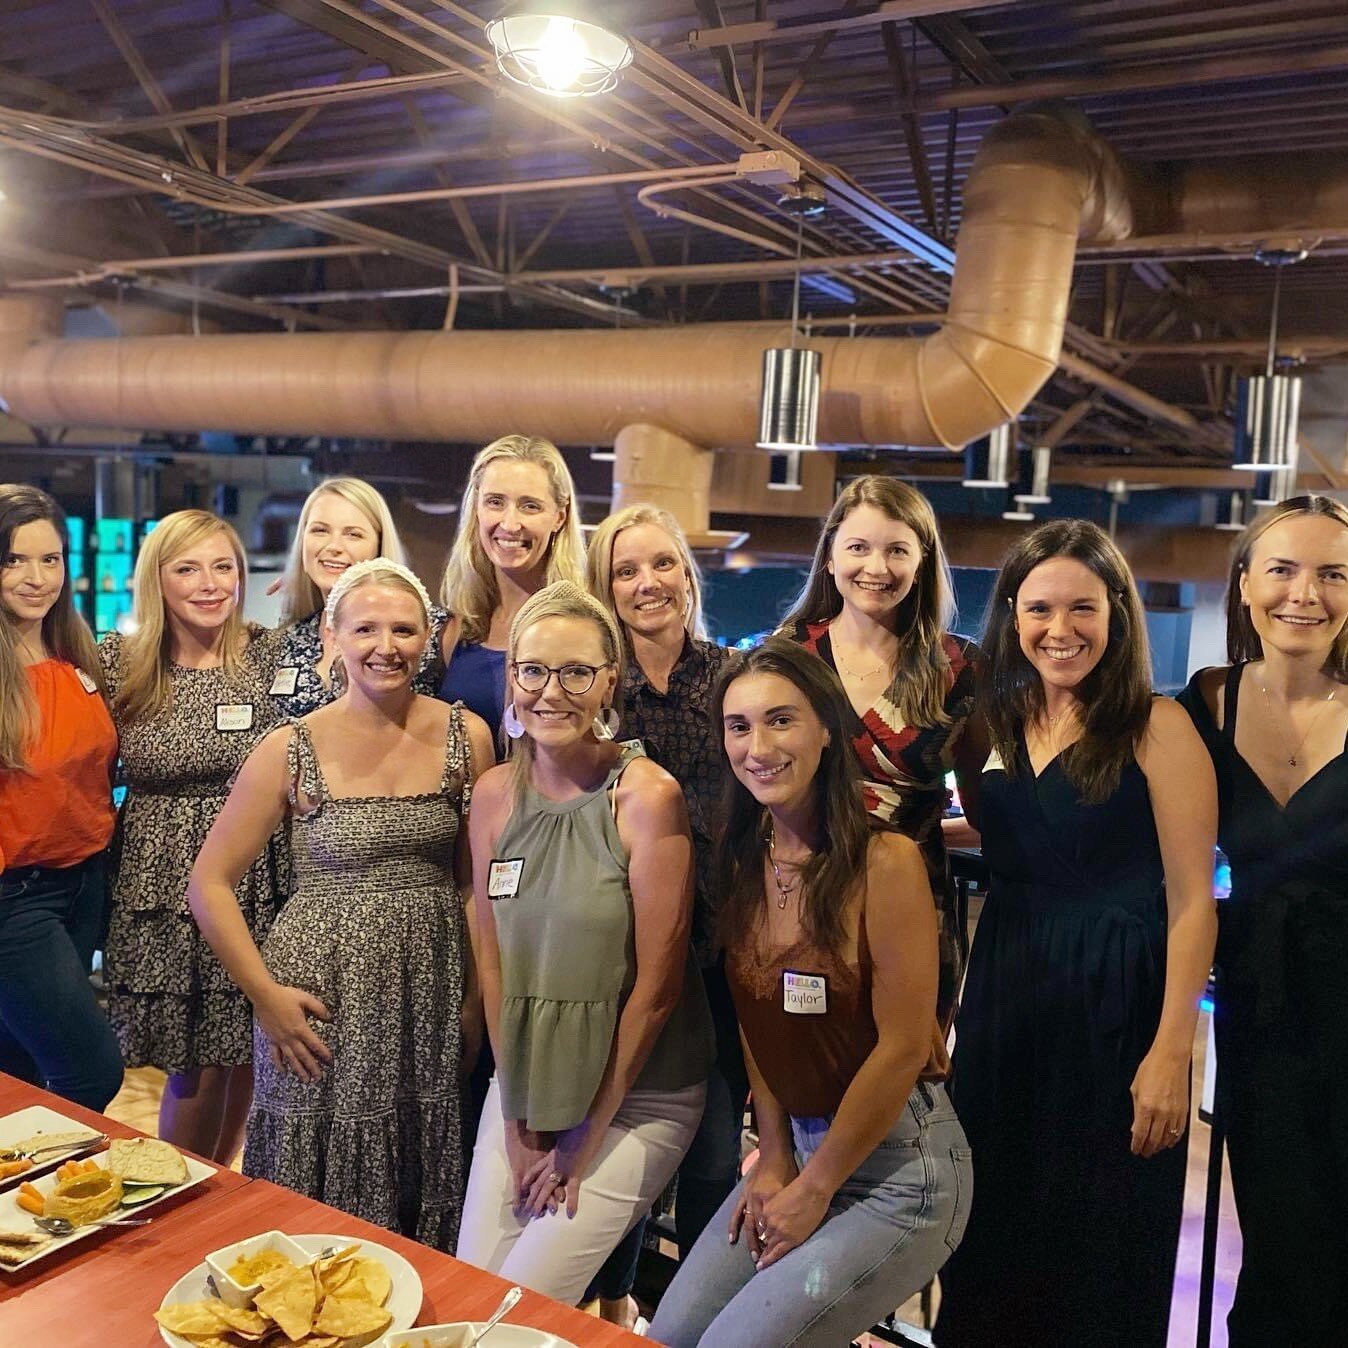 Our leadership team had a phenomenal weekend of connection and planning as we hosted our inaugural MOMCODE Brentwood Circle Board Retreat. Highlights from the weekend included a fun team dinner at @hucksbrewco, where local author @hilarybarnett gave 